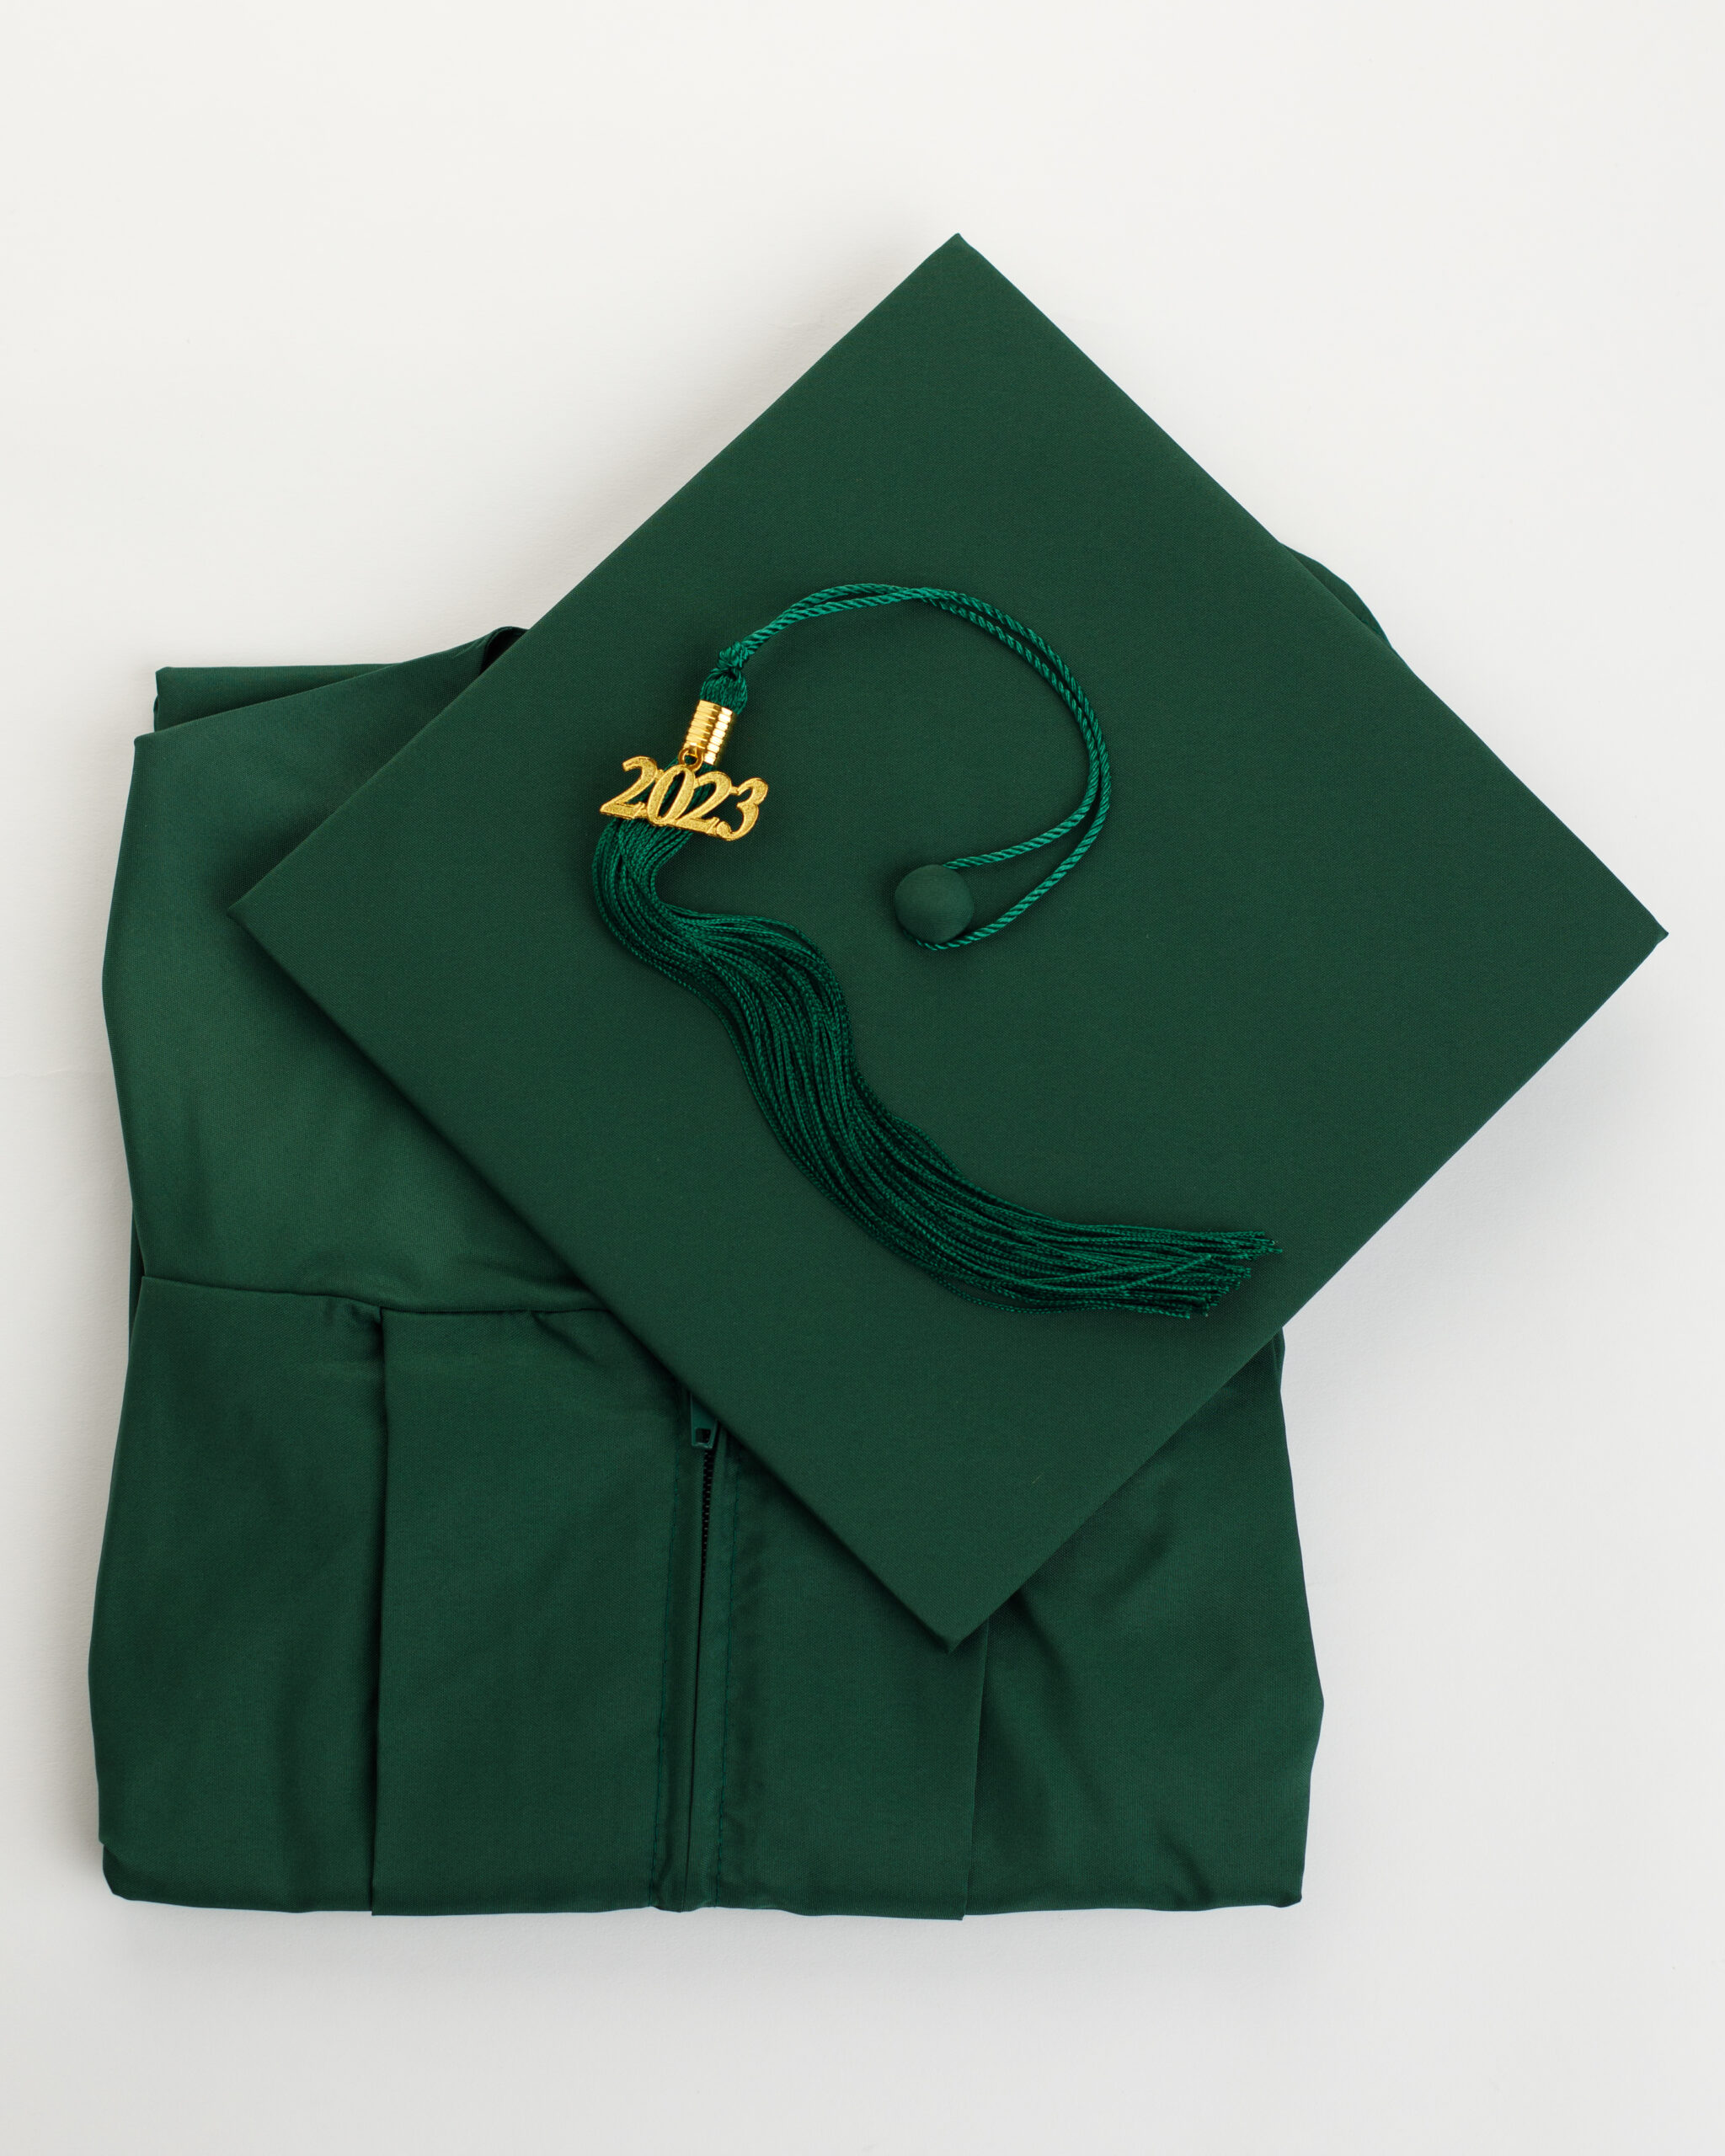 Hunter Green Cap and Gown Package | Academic Apparel